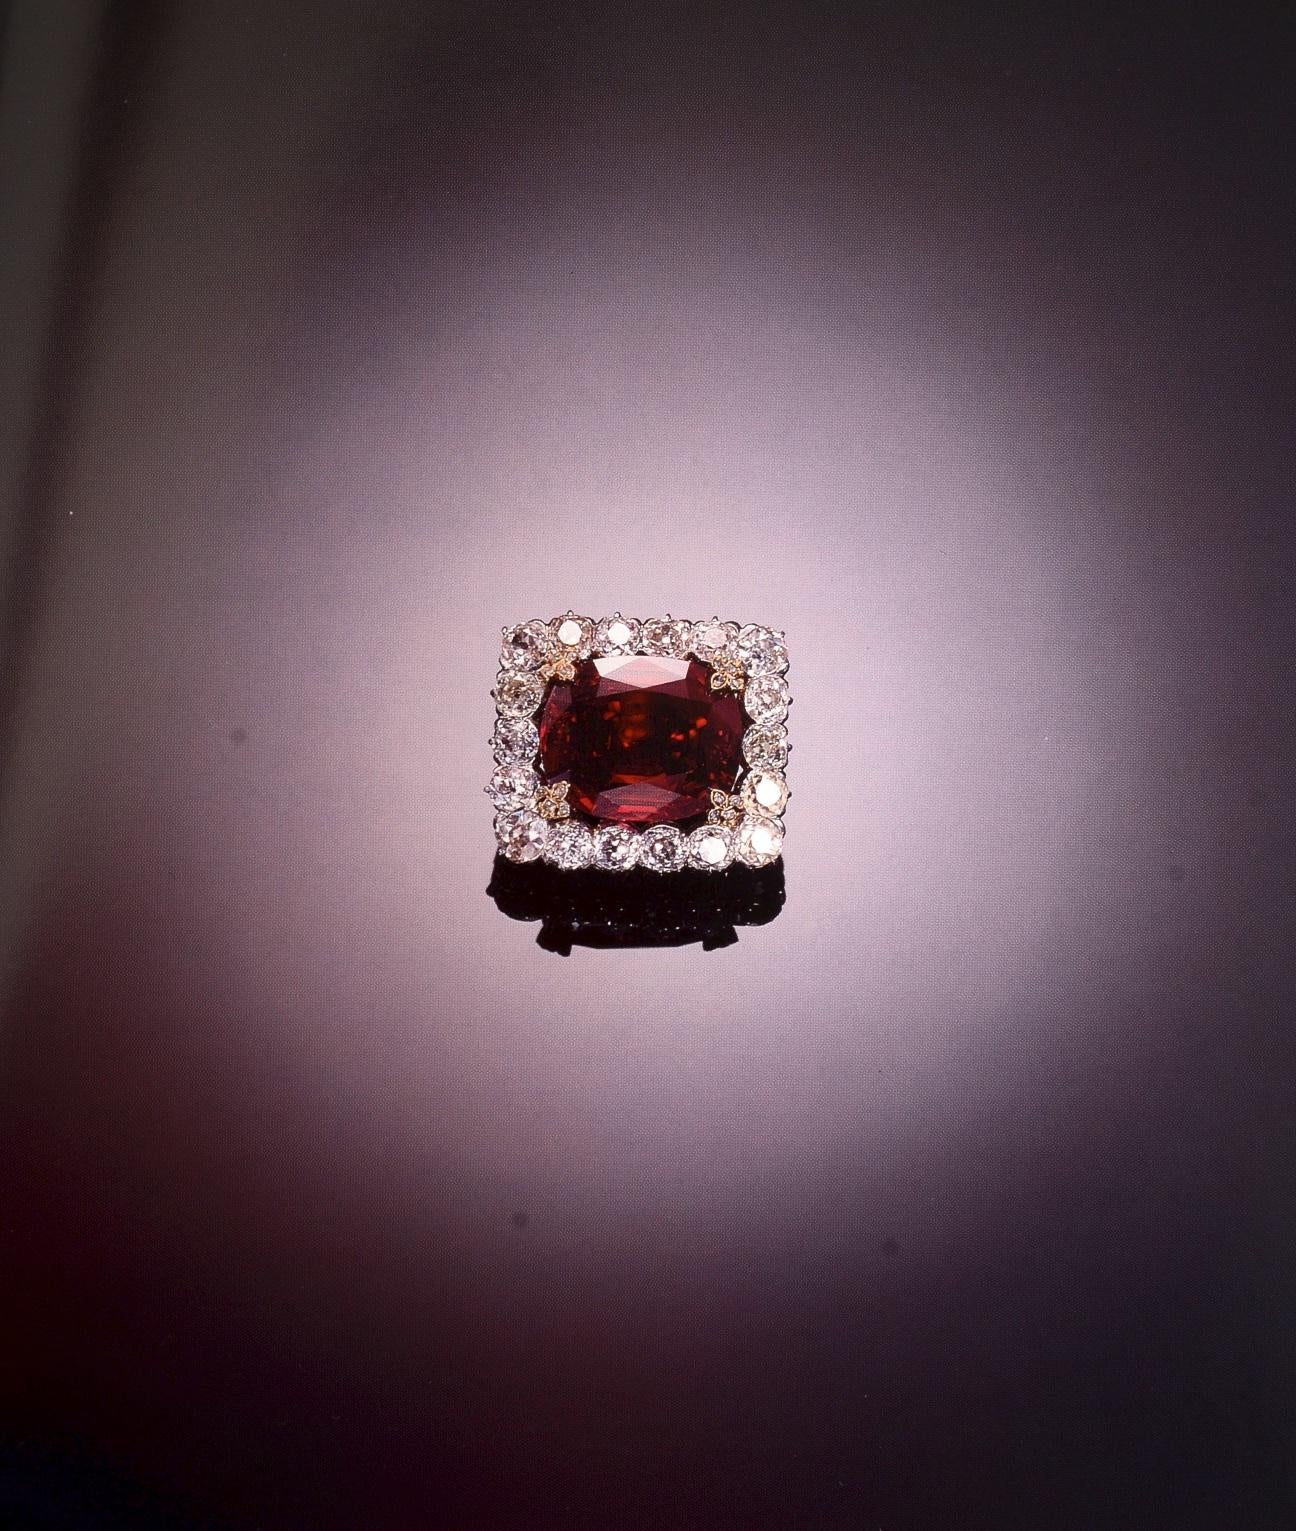 Sotheby's Catalog: The Mandalay Ruby October 1988. First edition softcover. Extremely well described with the historic background. A superb ruby and diamond ring, mounted by Raymond Yard. Set with an oval ruby weighing 11.88-carat, to the shoulders